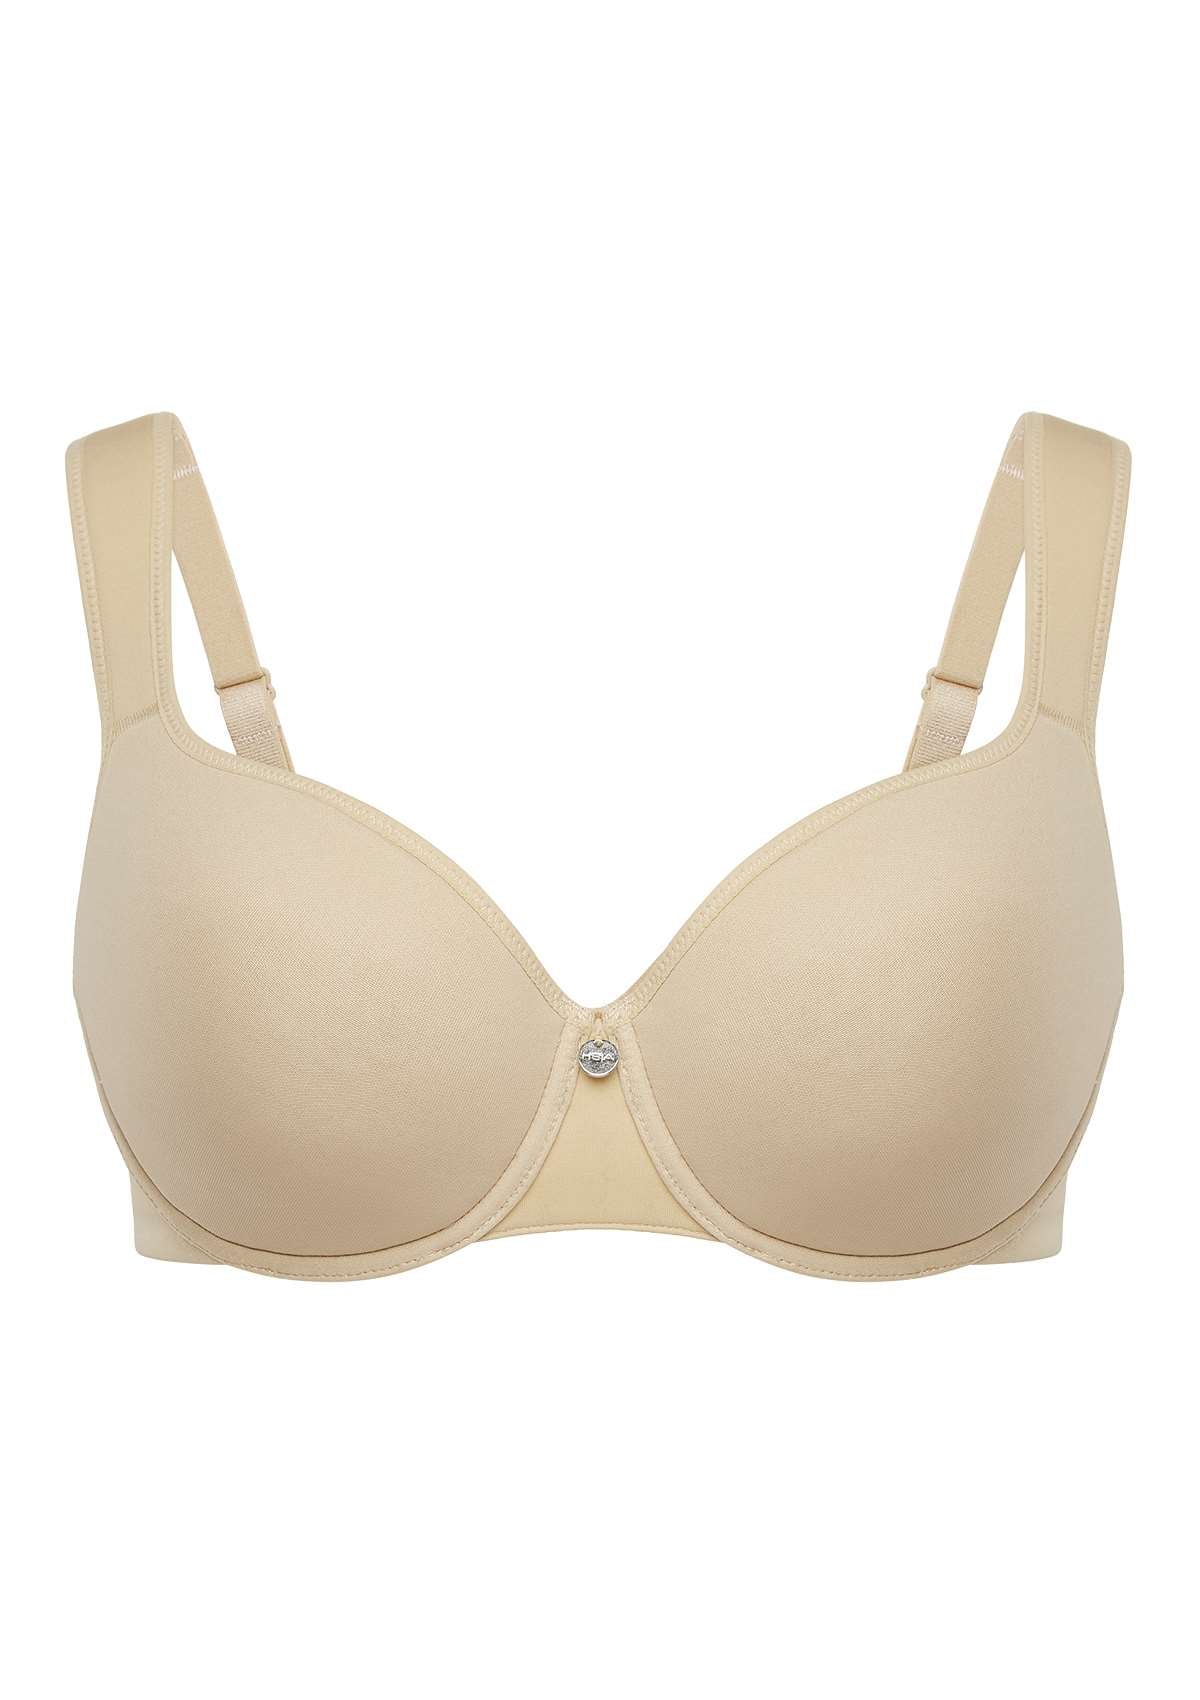 HSIA Patricia Seamless Lightly Padded Minimizer Bra -for Bigger Busts - Beige / 46 / DDD/F